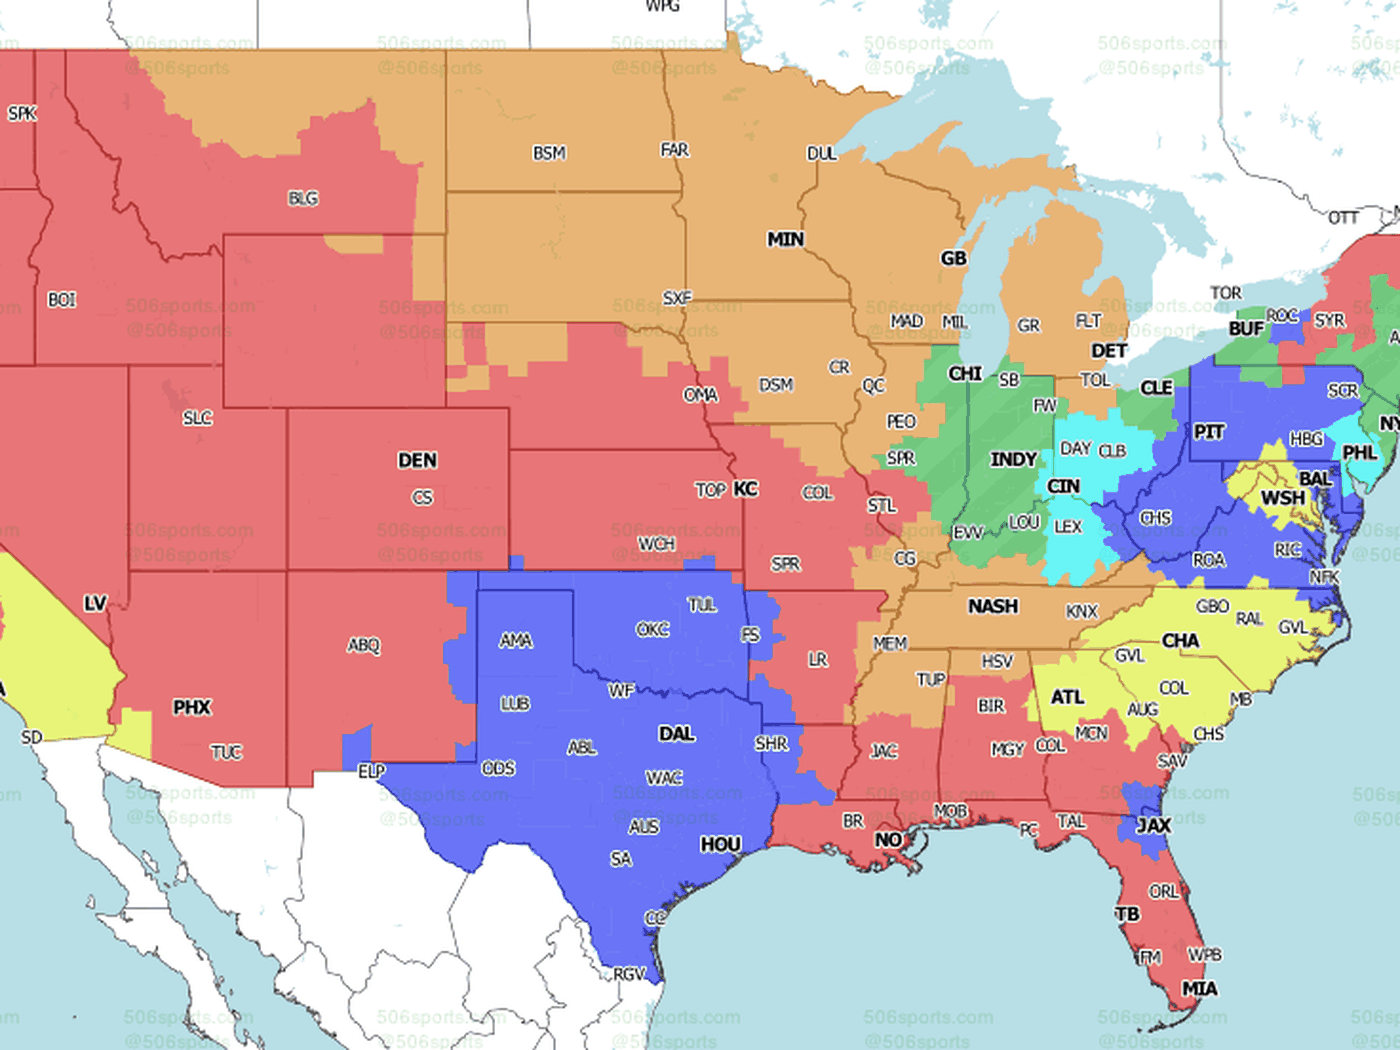 NFL Week 3 National TV Maps: Which games will you get on Sunday? -  Baltimore Beatdown